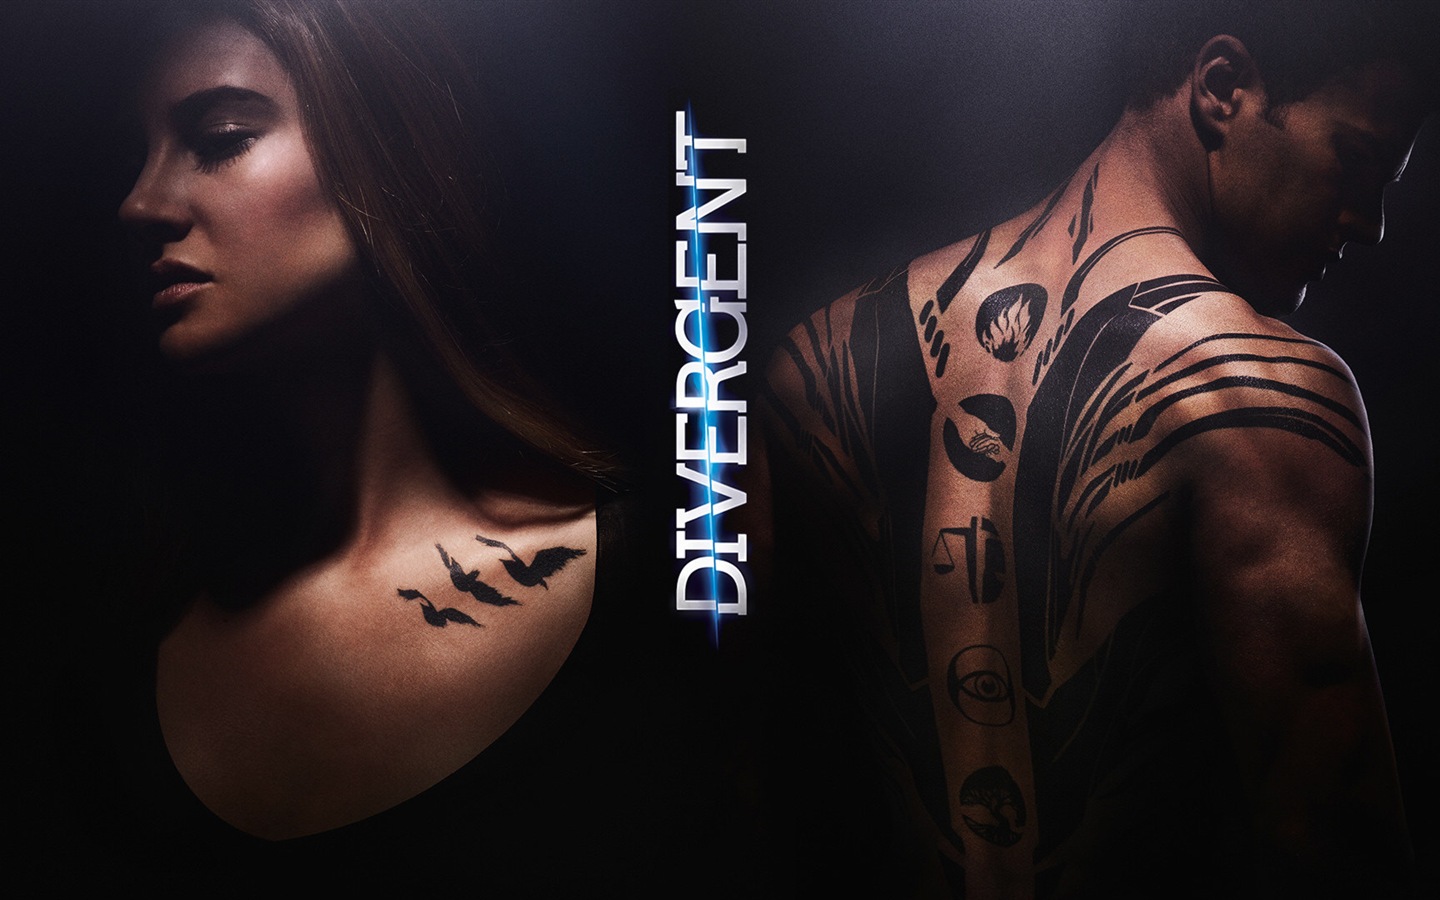 Divergent movie HD wallpapers #4 - 1440x900